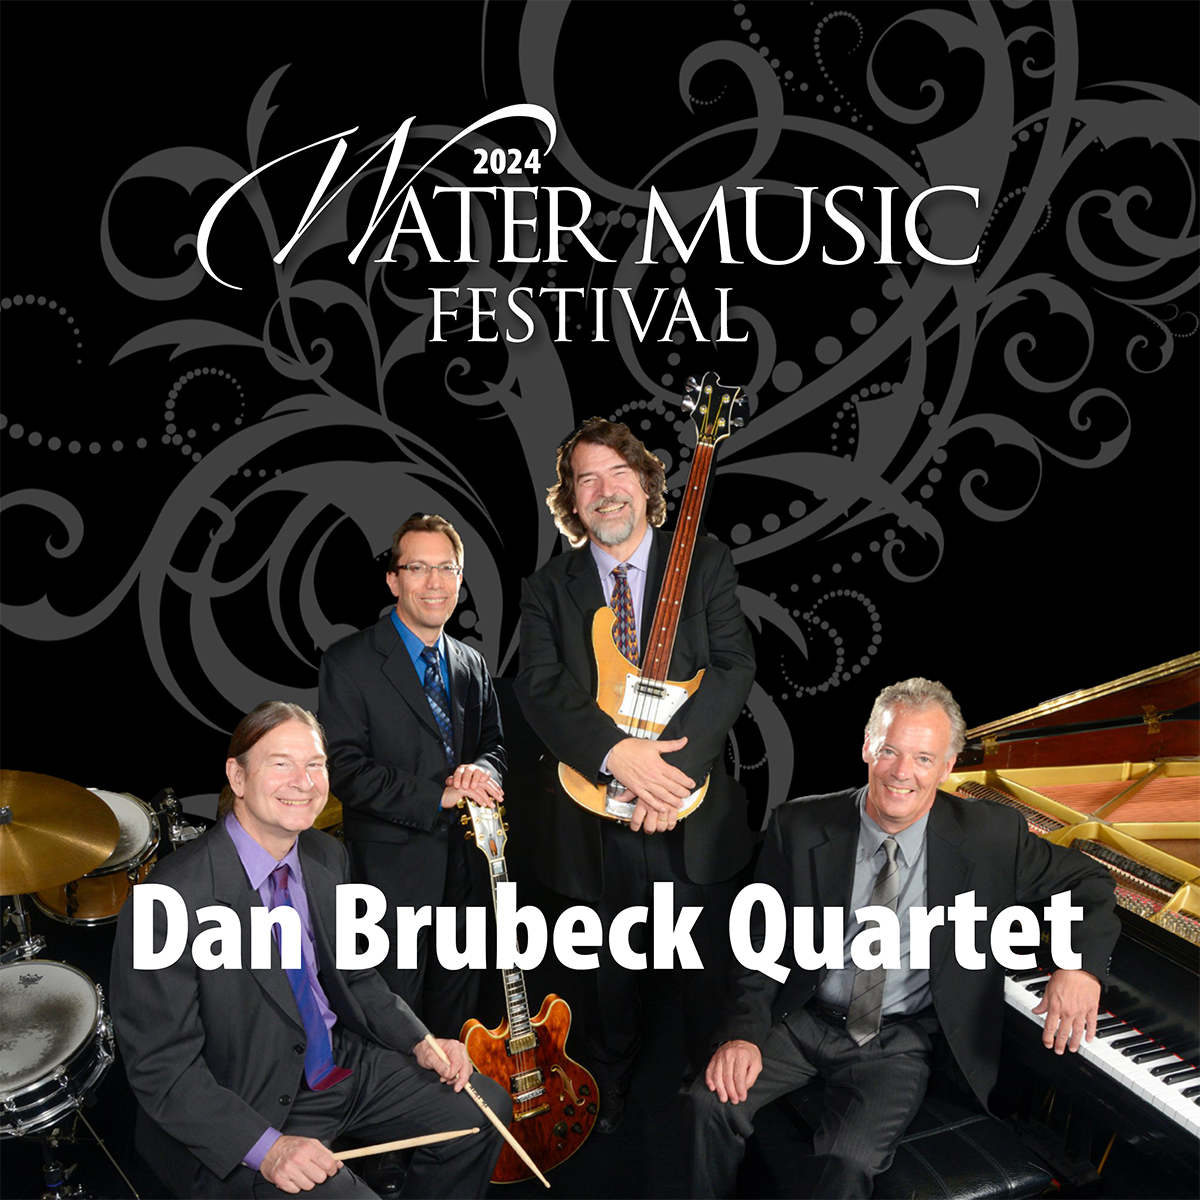 The four musicians known as the Dan Brubeck Quartet with their instruments. A drummer at his kit, a pianist at a grand piano, a guitarist holding his guitar in front of him with both hands and a bass player holding the neck of his bass which is standing on the floor. Behind them is a black backdrop with swirls and the logo to the Water Music Festival 2024.